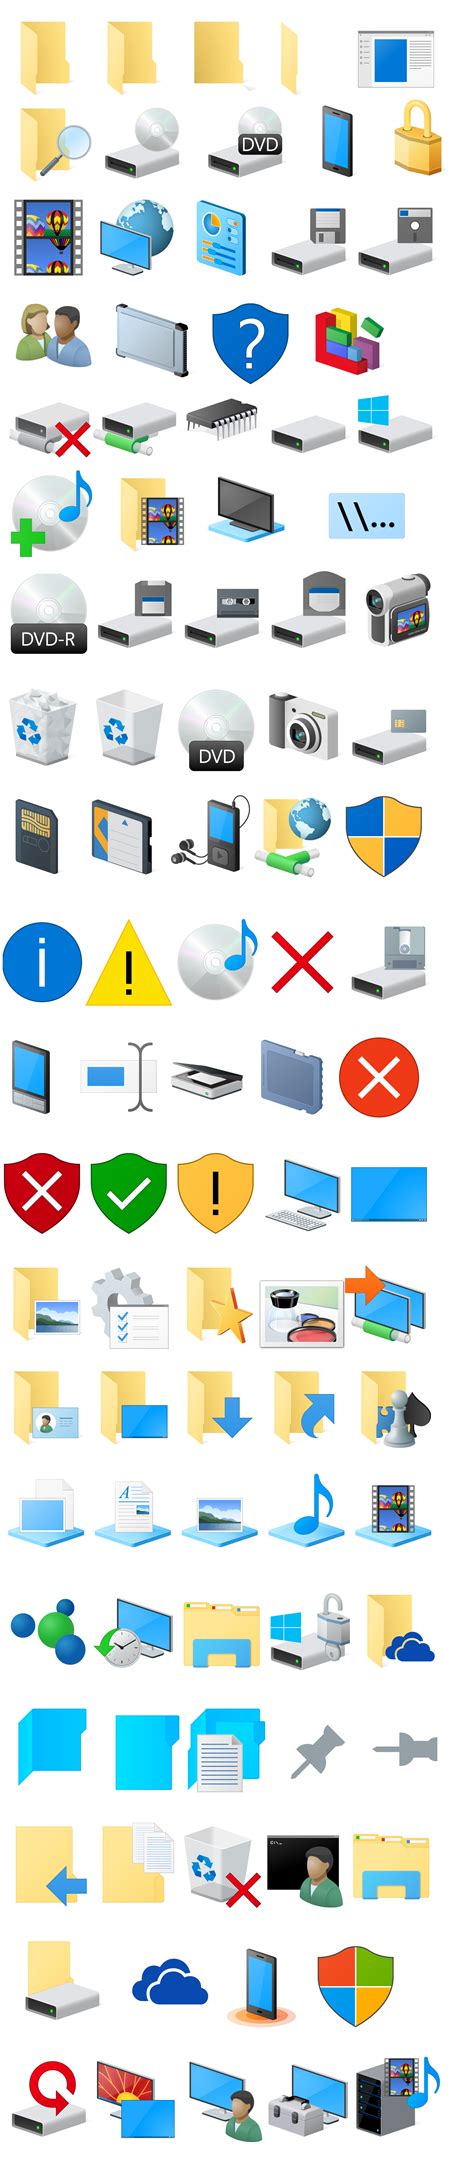 Desktop Icons Windows 10 Solved How To Change Desktop Icon Spacing In